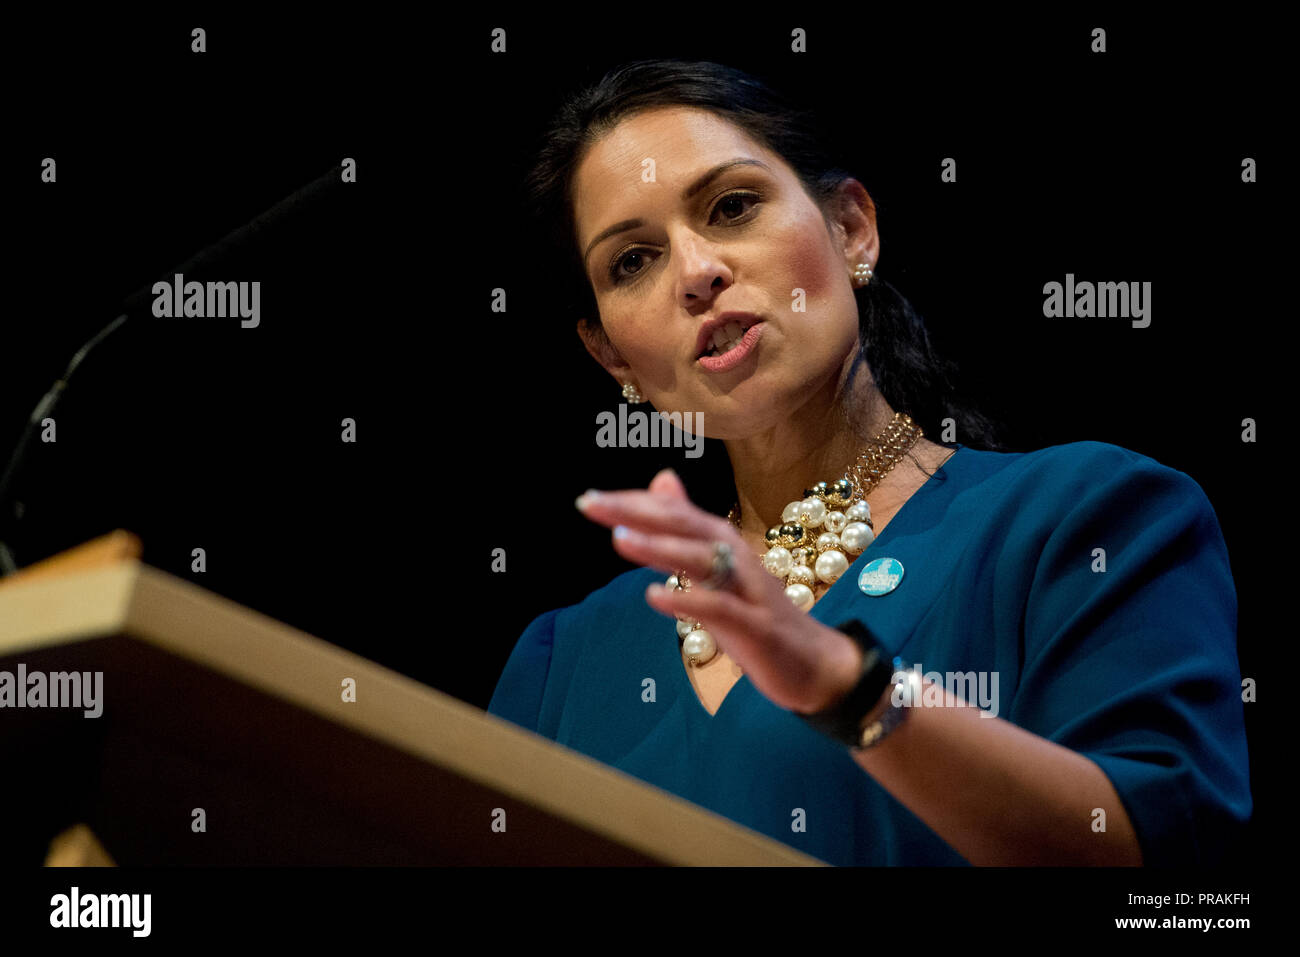 Birmingham, UK. 30th September 2018. Priti Patel, Conservative MP for Witham, speaks at the Brexit Central fringe event at the Conservative Party Conference in Birmingham. © Russell Hart/Alamy Live News. Stock Photo